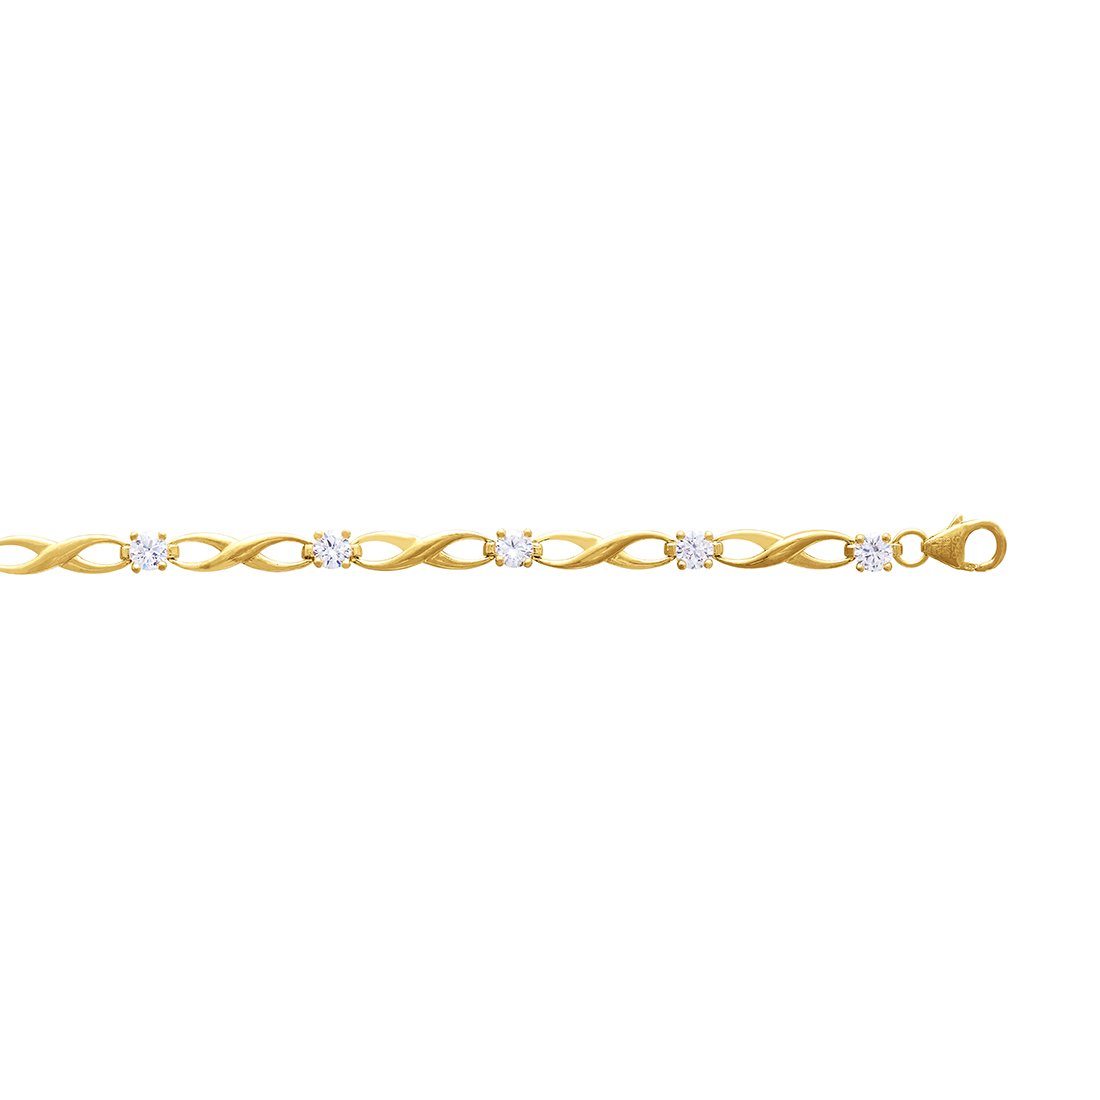 Cubic Zirconia Infinity Bracelet in 9ct Yellow Gold Silver Infused Bracelets Bevilles 